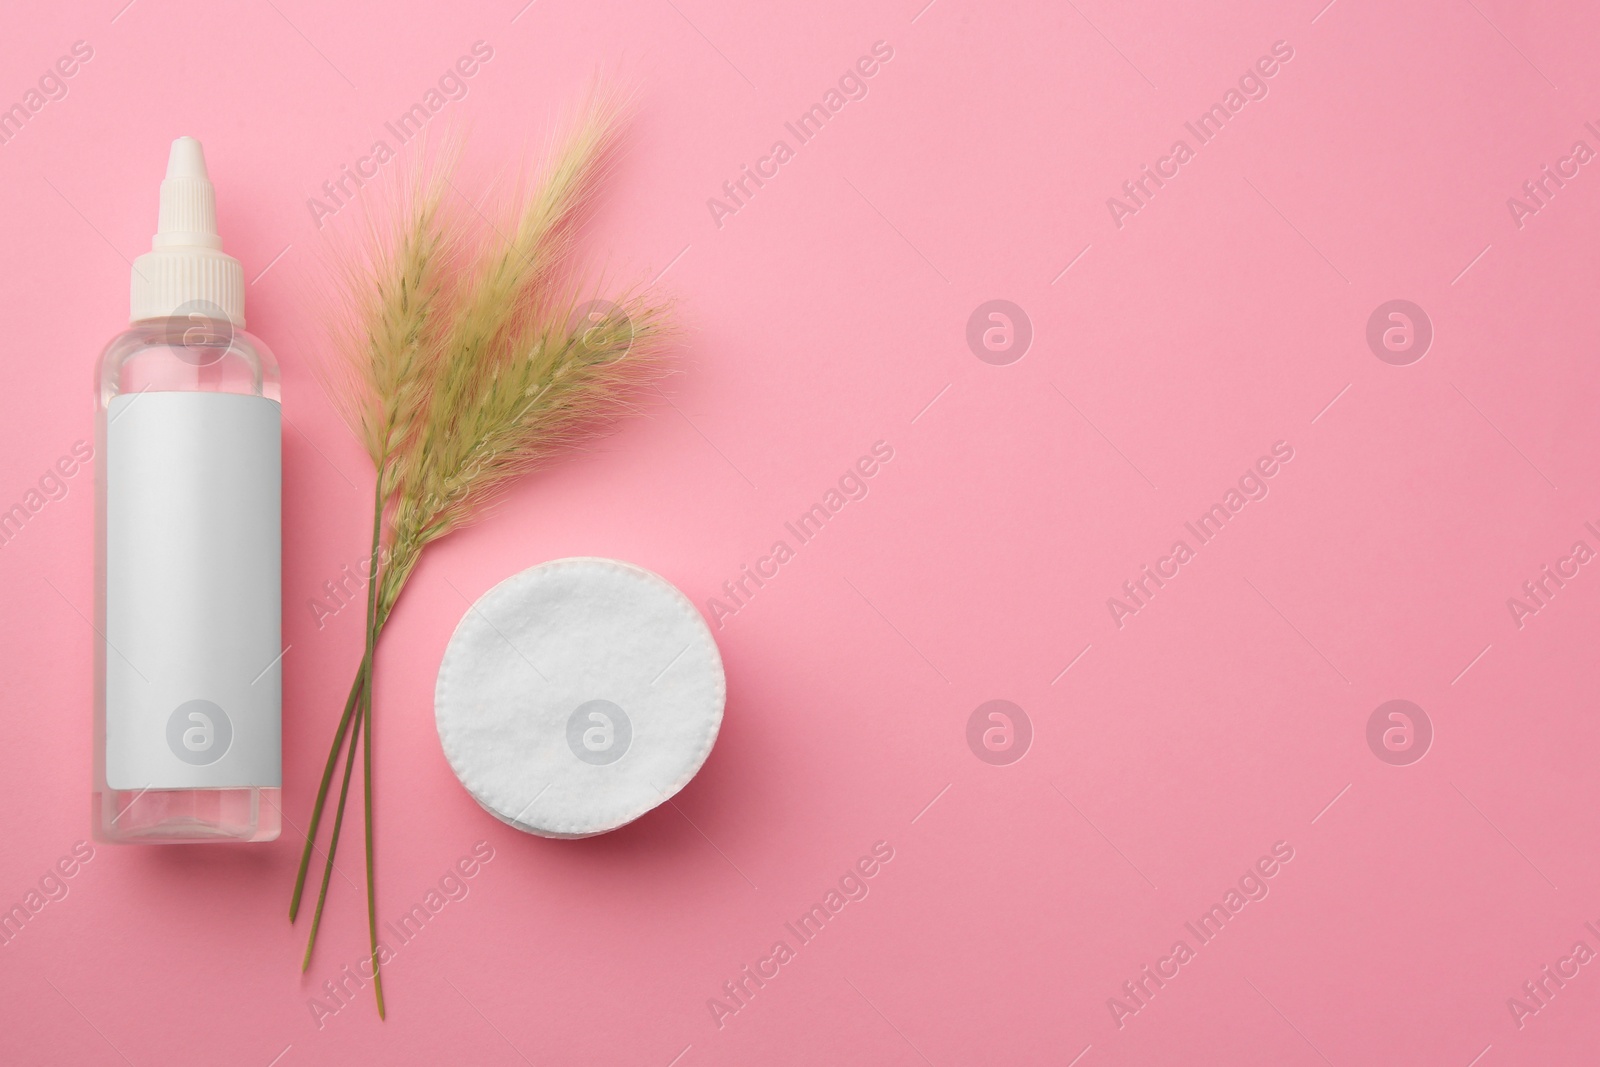 Photo of Bottle of makeup remover, cotton pads and spikelets on pink background, flat lay. Space for text